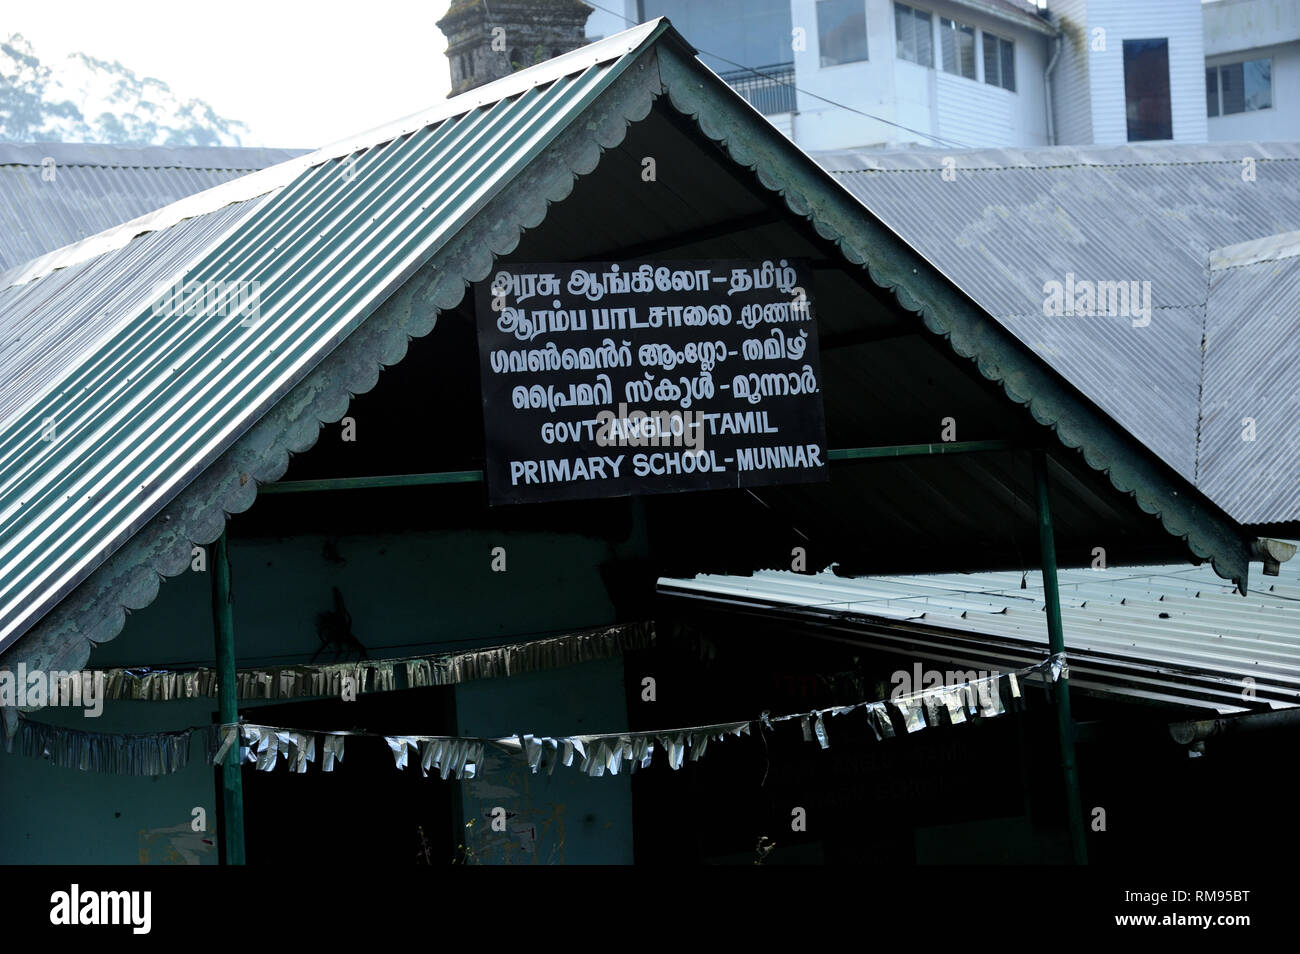 Government Anglo primary school, munnar, Kerala, India, Asia Stock Photo